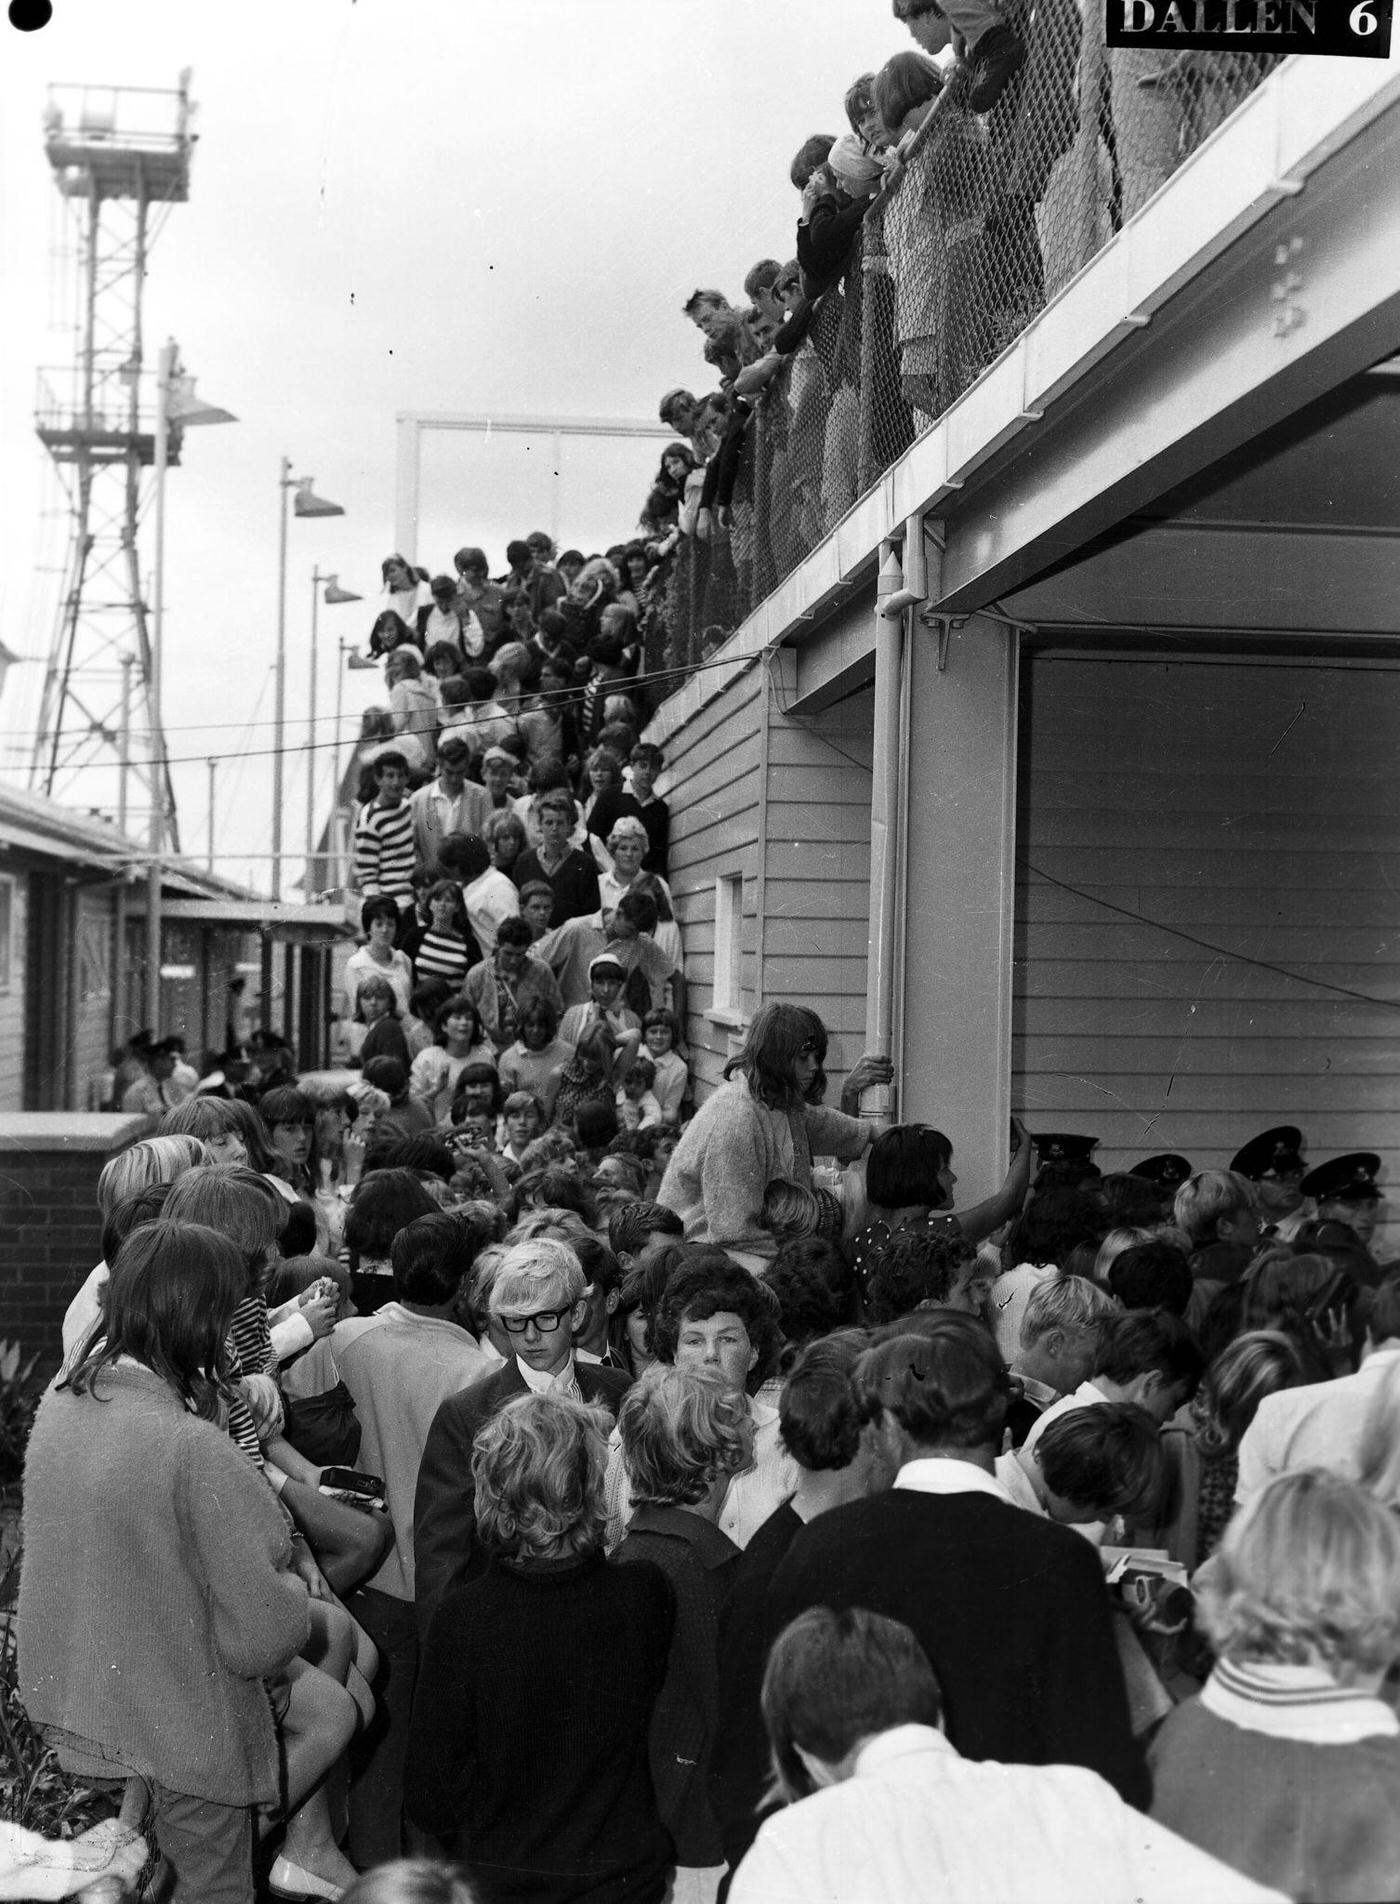 Fans await the arrival of the Rolling Stones at Mascot Airport, Sydney, January 21 1965.